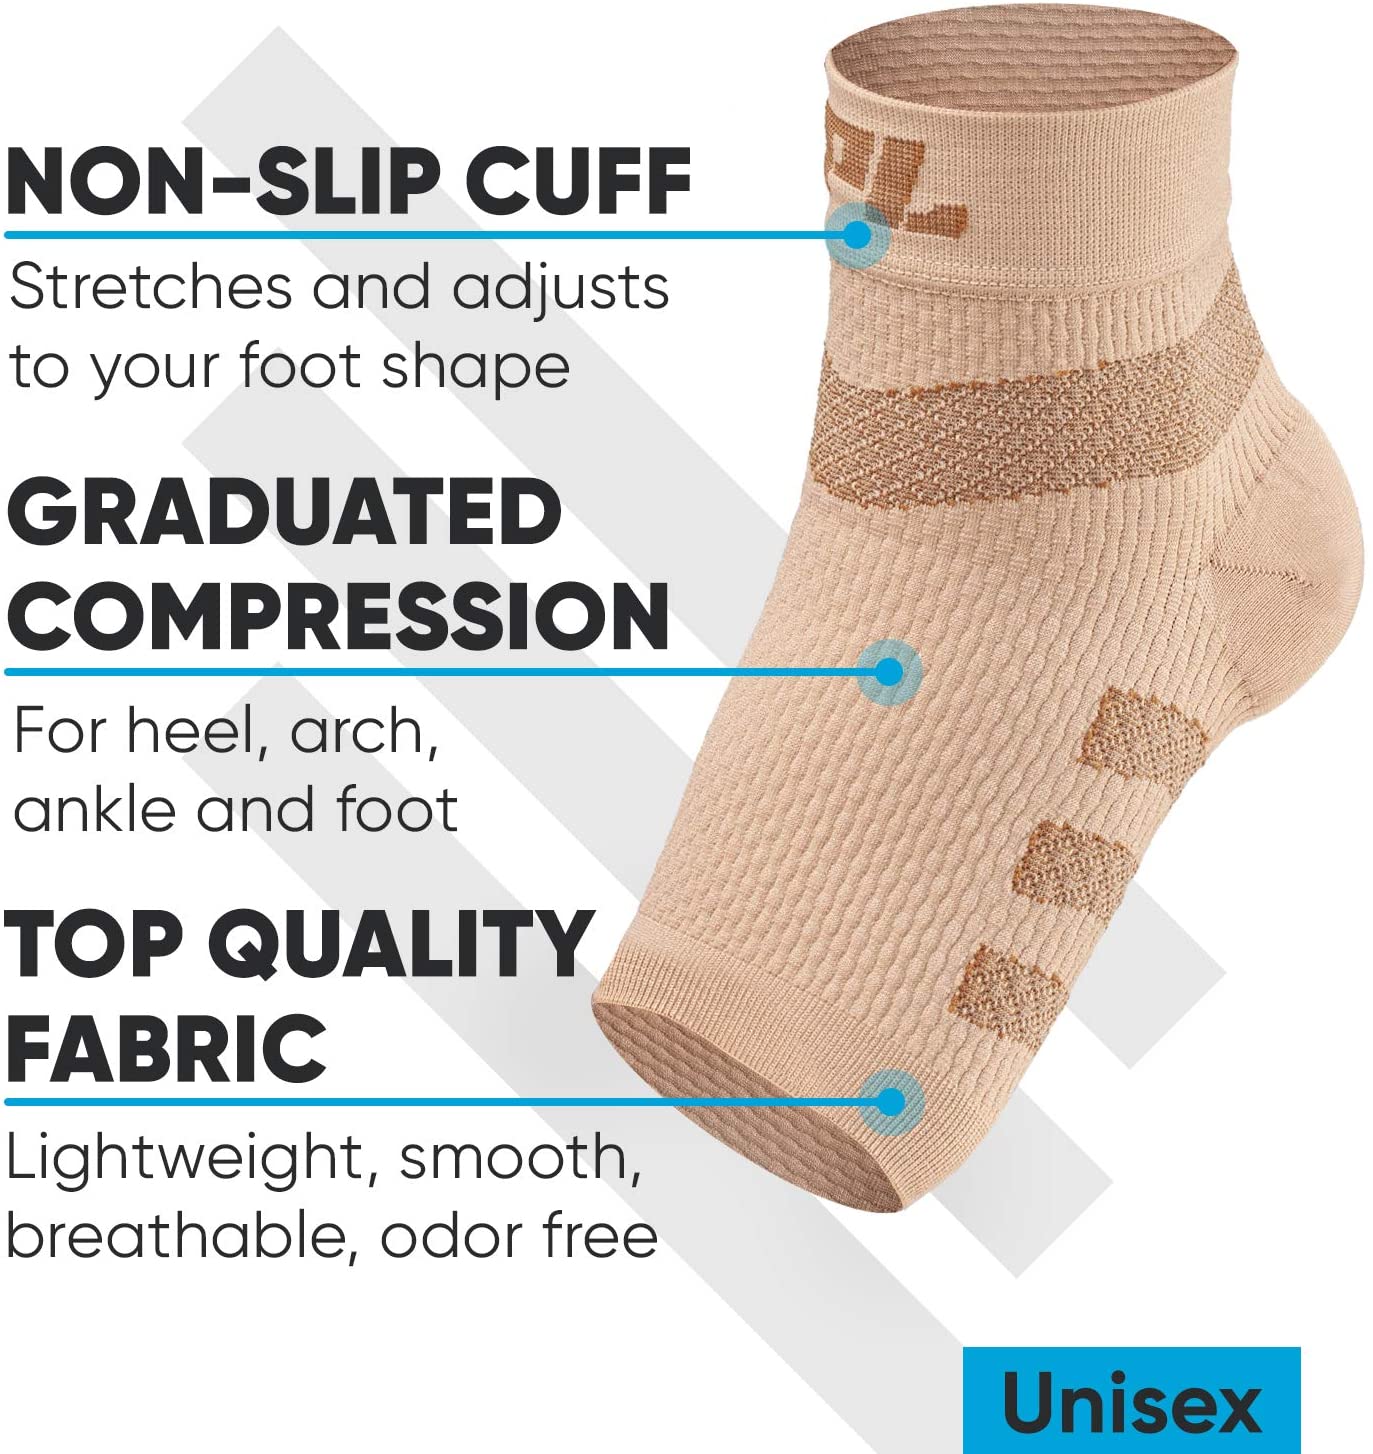 Powerlix plantar fasciitis support sock in beige pictured. Text to the left points to the sock and reads, "Non-slip cuff: Stretches and adjusts to your foot shape. Graduated compression: For heel, arch, ankle, and foot. Top quality fabric: Lightweight, smooth, berathable, odor free." Lower text reads, "Unisex."